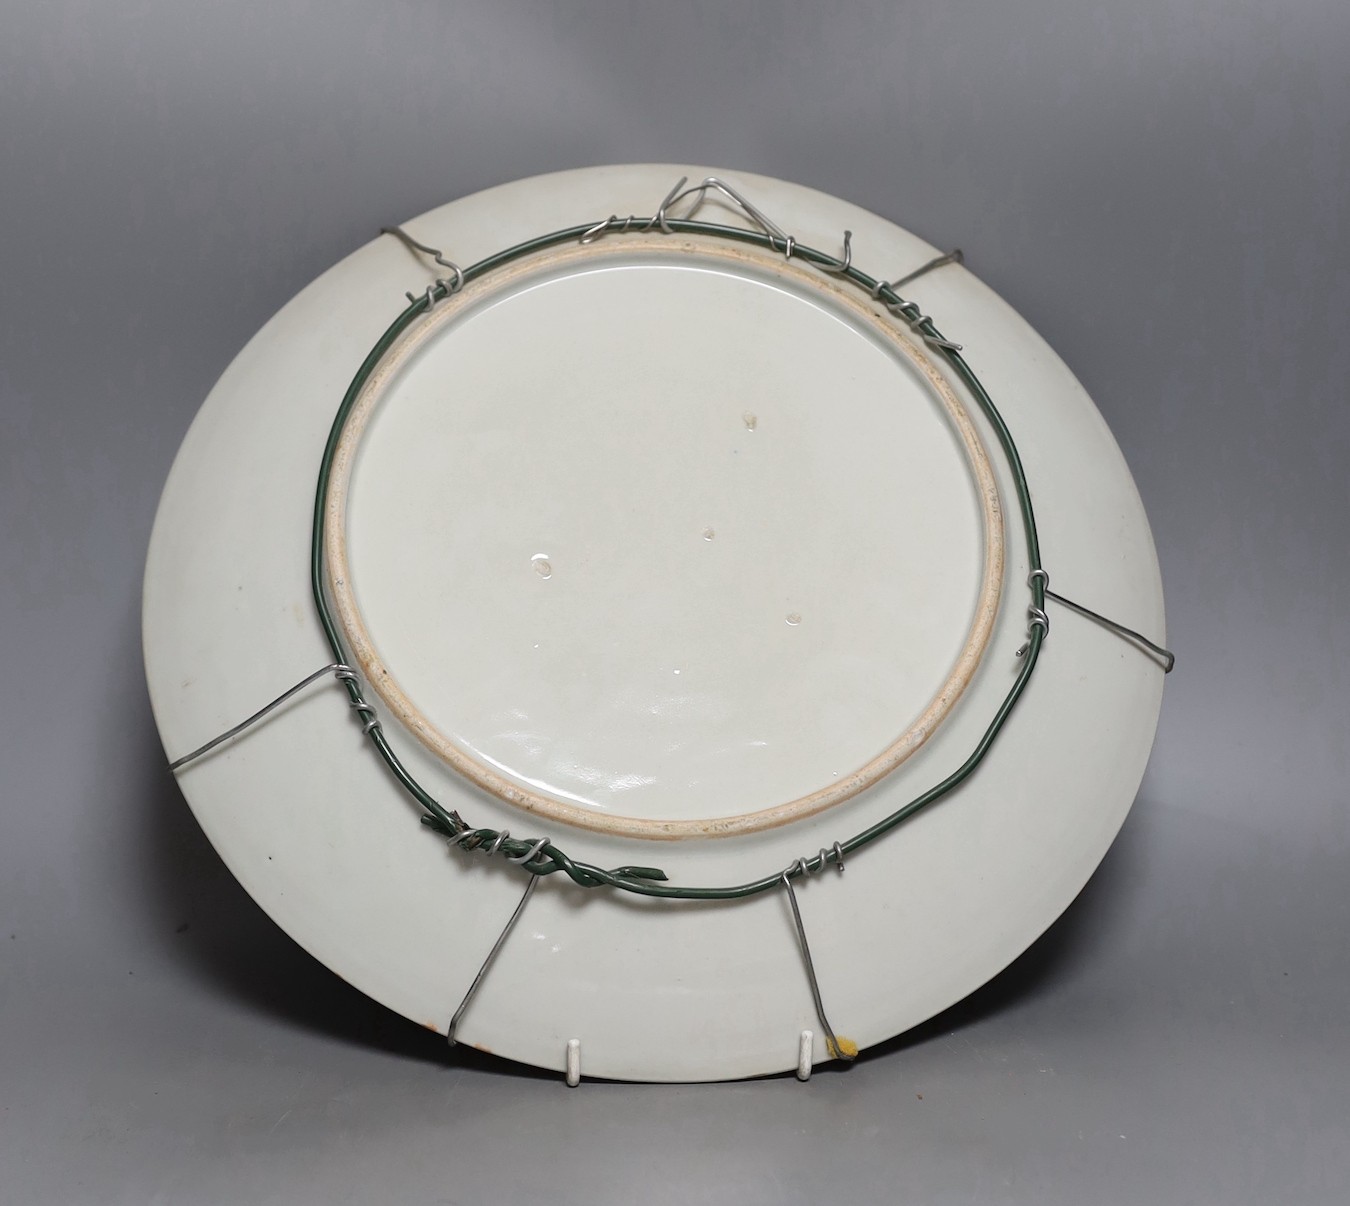 An early 20th century Japanese yellow ground dish with bird and floral decoration - 36.5cm diameter